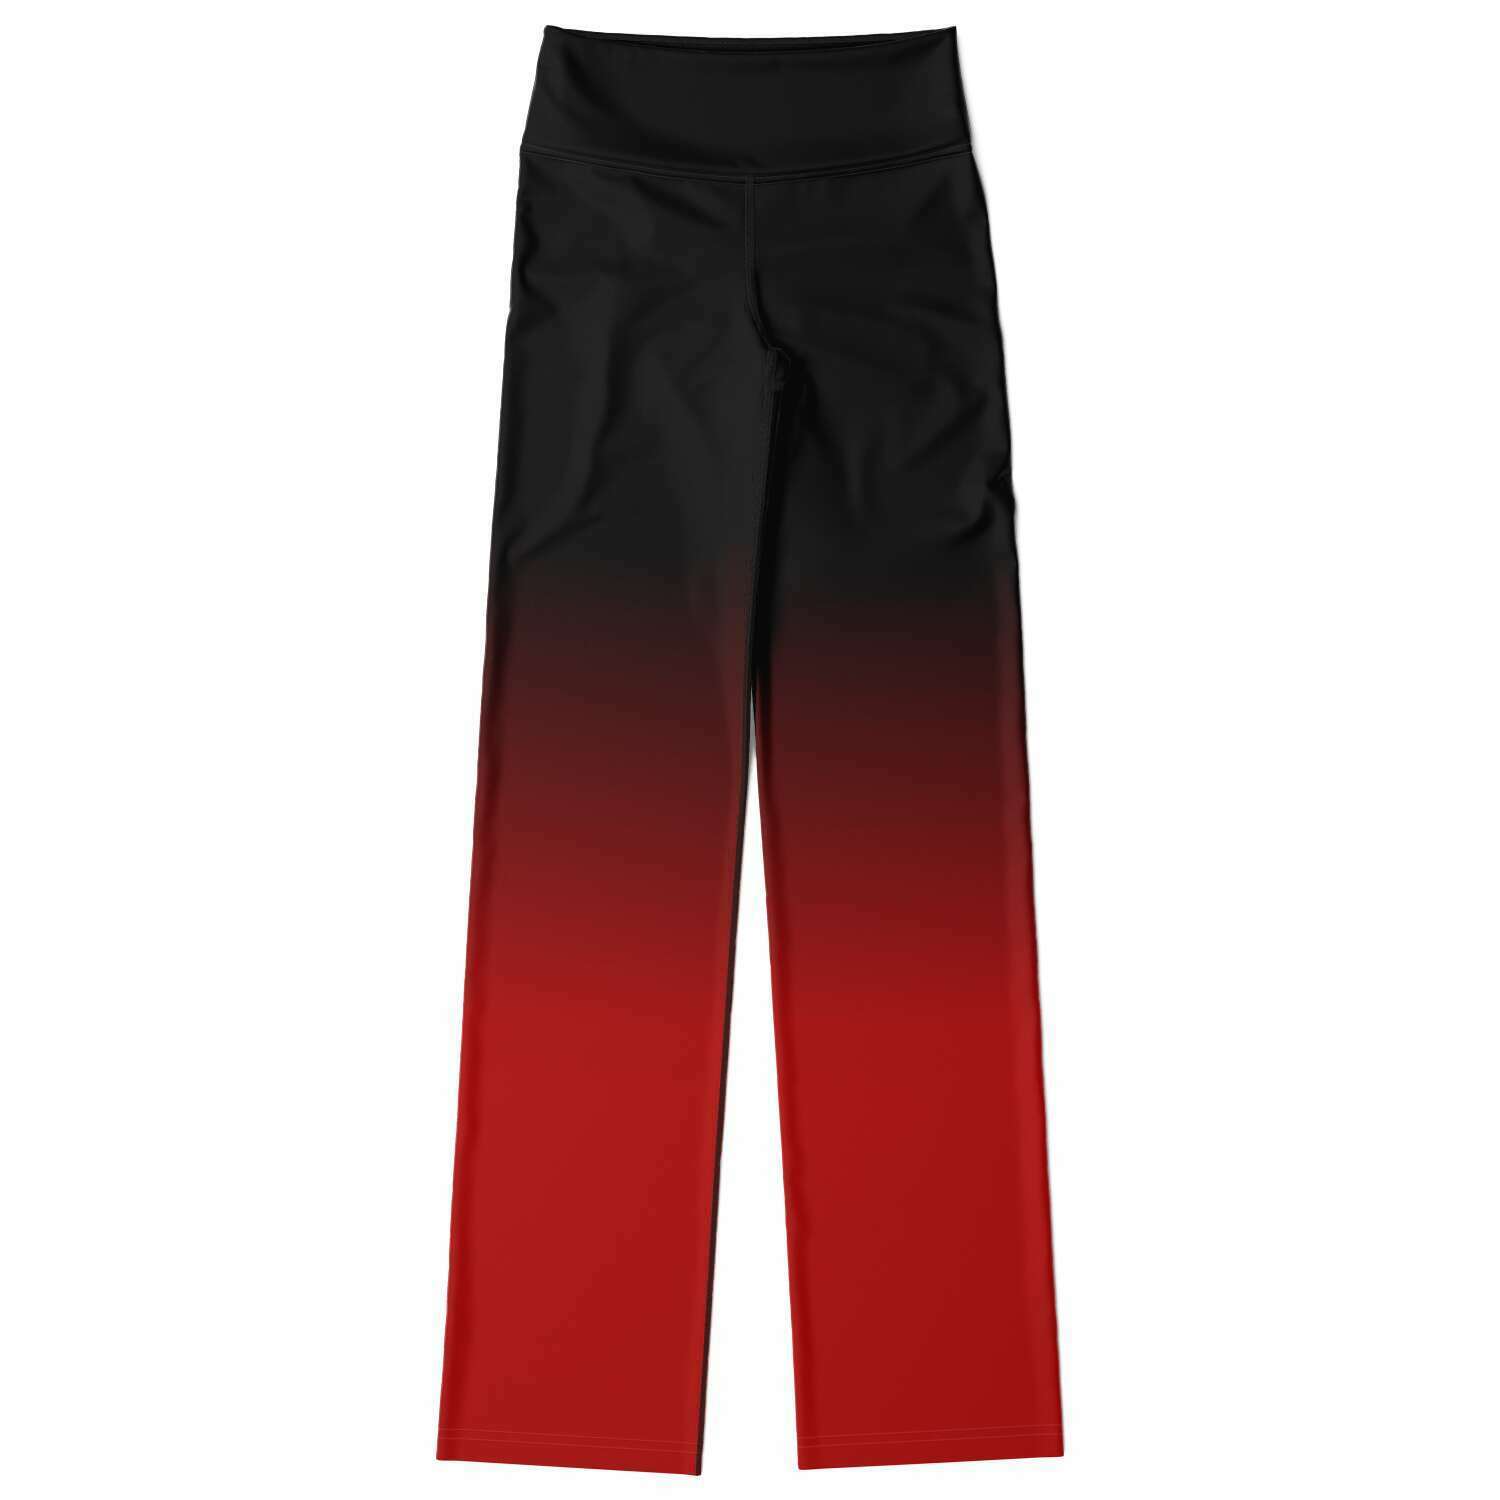 Black Red Ombre Flared Leggings, Tie Dye Printed High Waisted Yoga Designer  with Pockets Stretch Workout Sexy Flare Pants